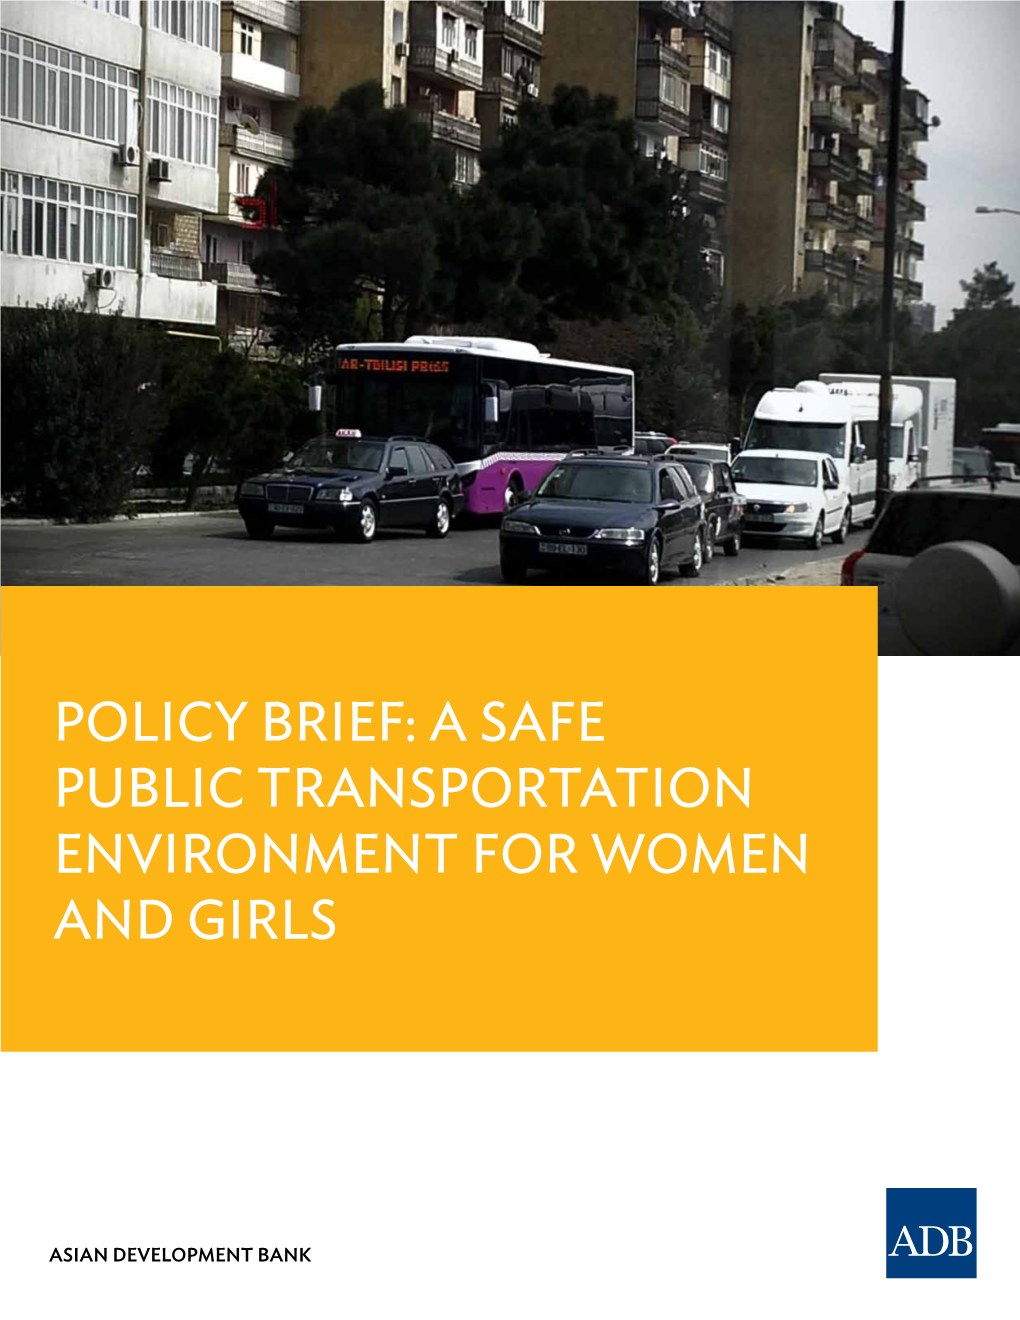 A Safe Public Transportation Environment for Women and Girls